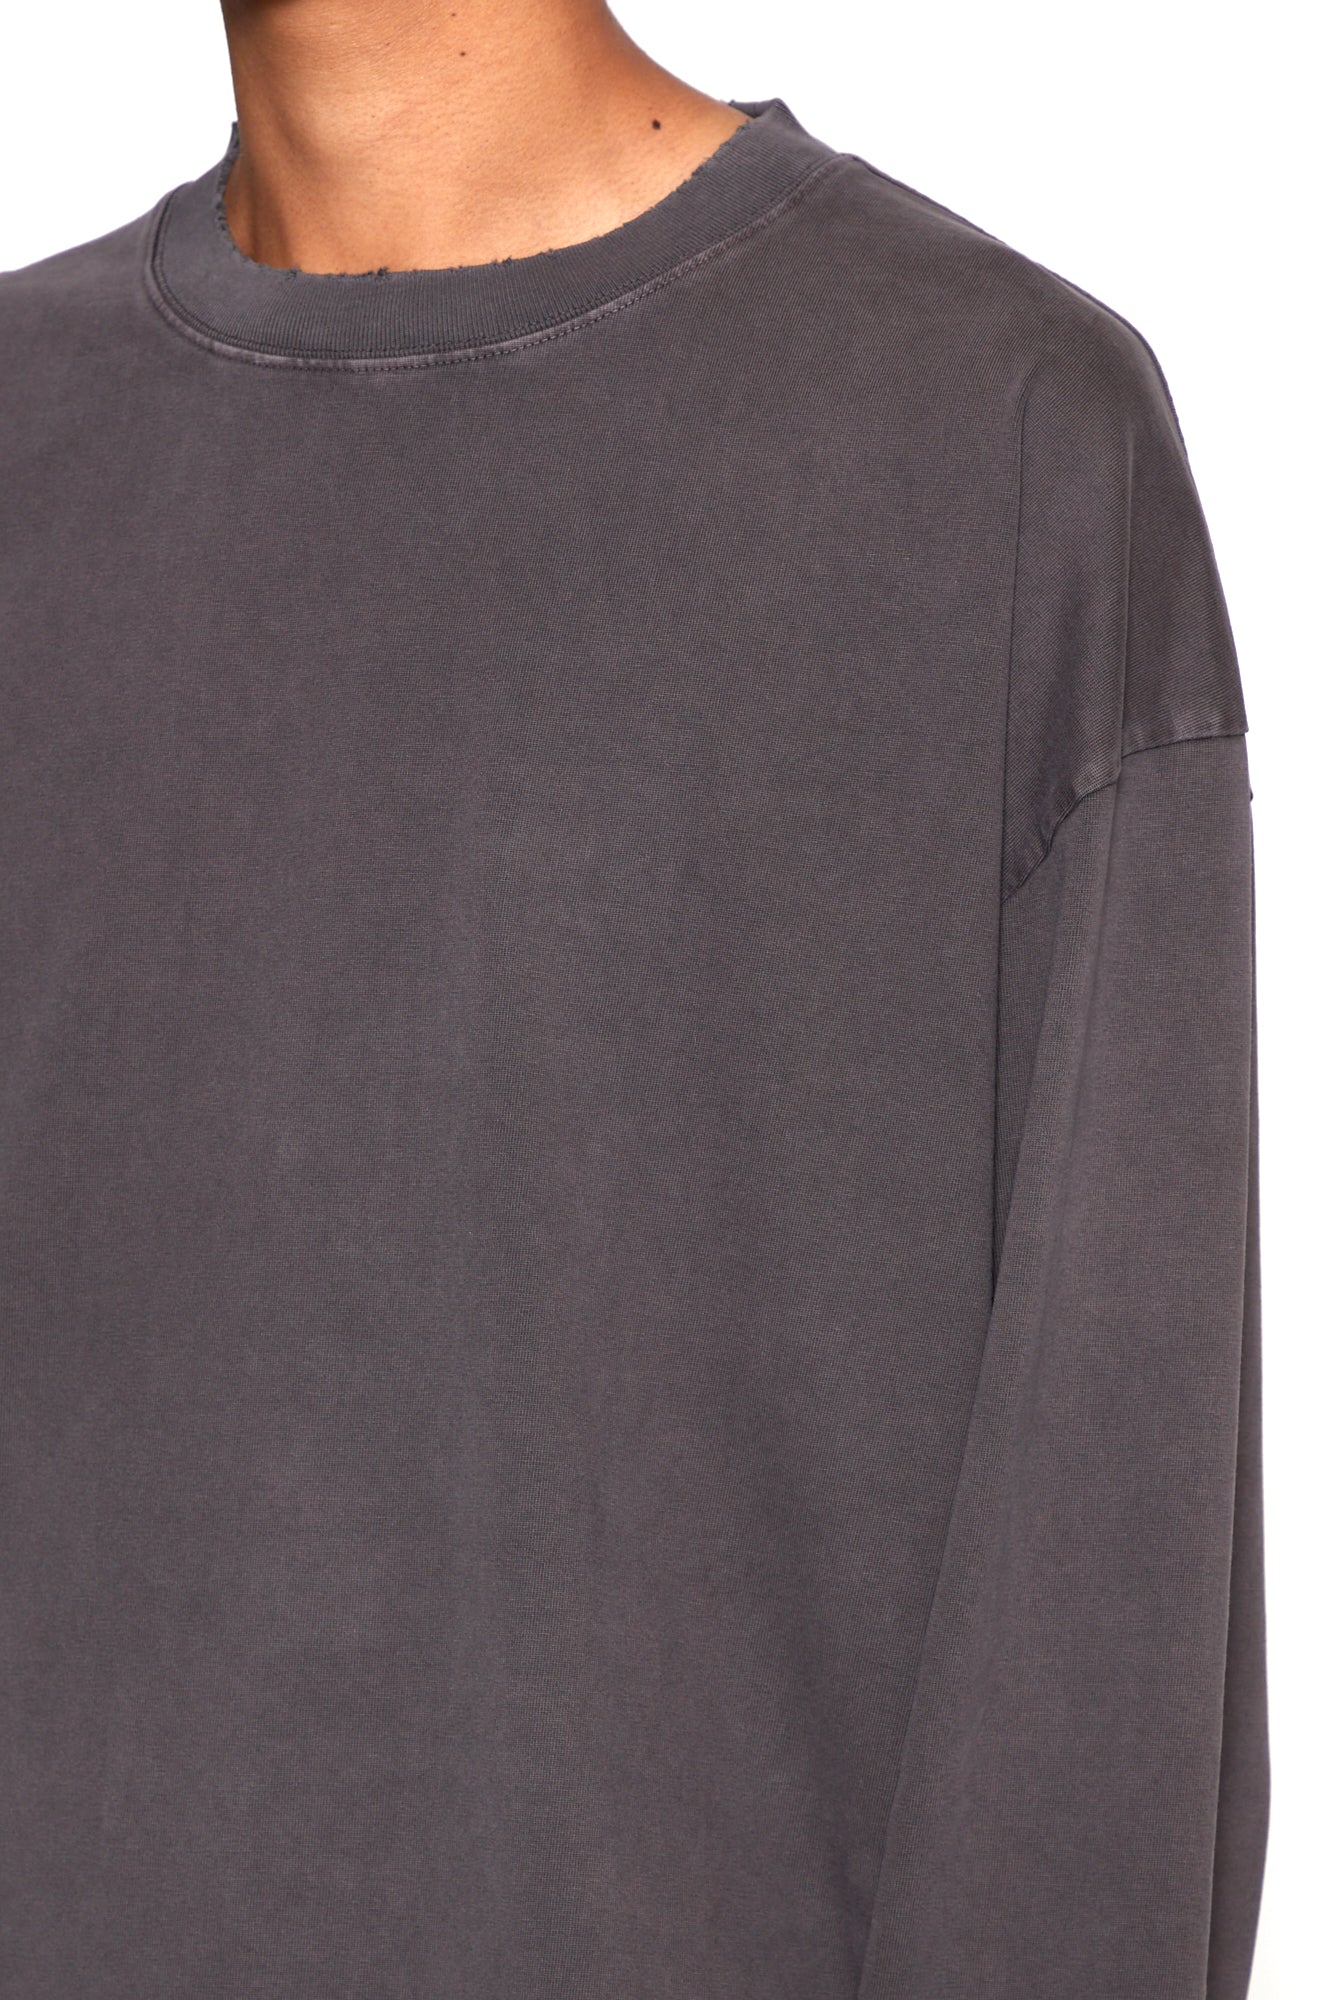 GREY WASHED DISTRESSED AGING LONG SLEEVE T-SHIRT